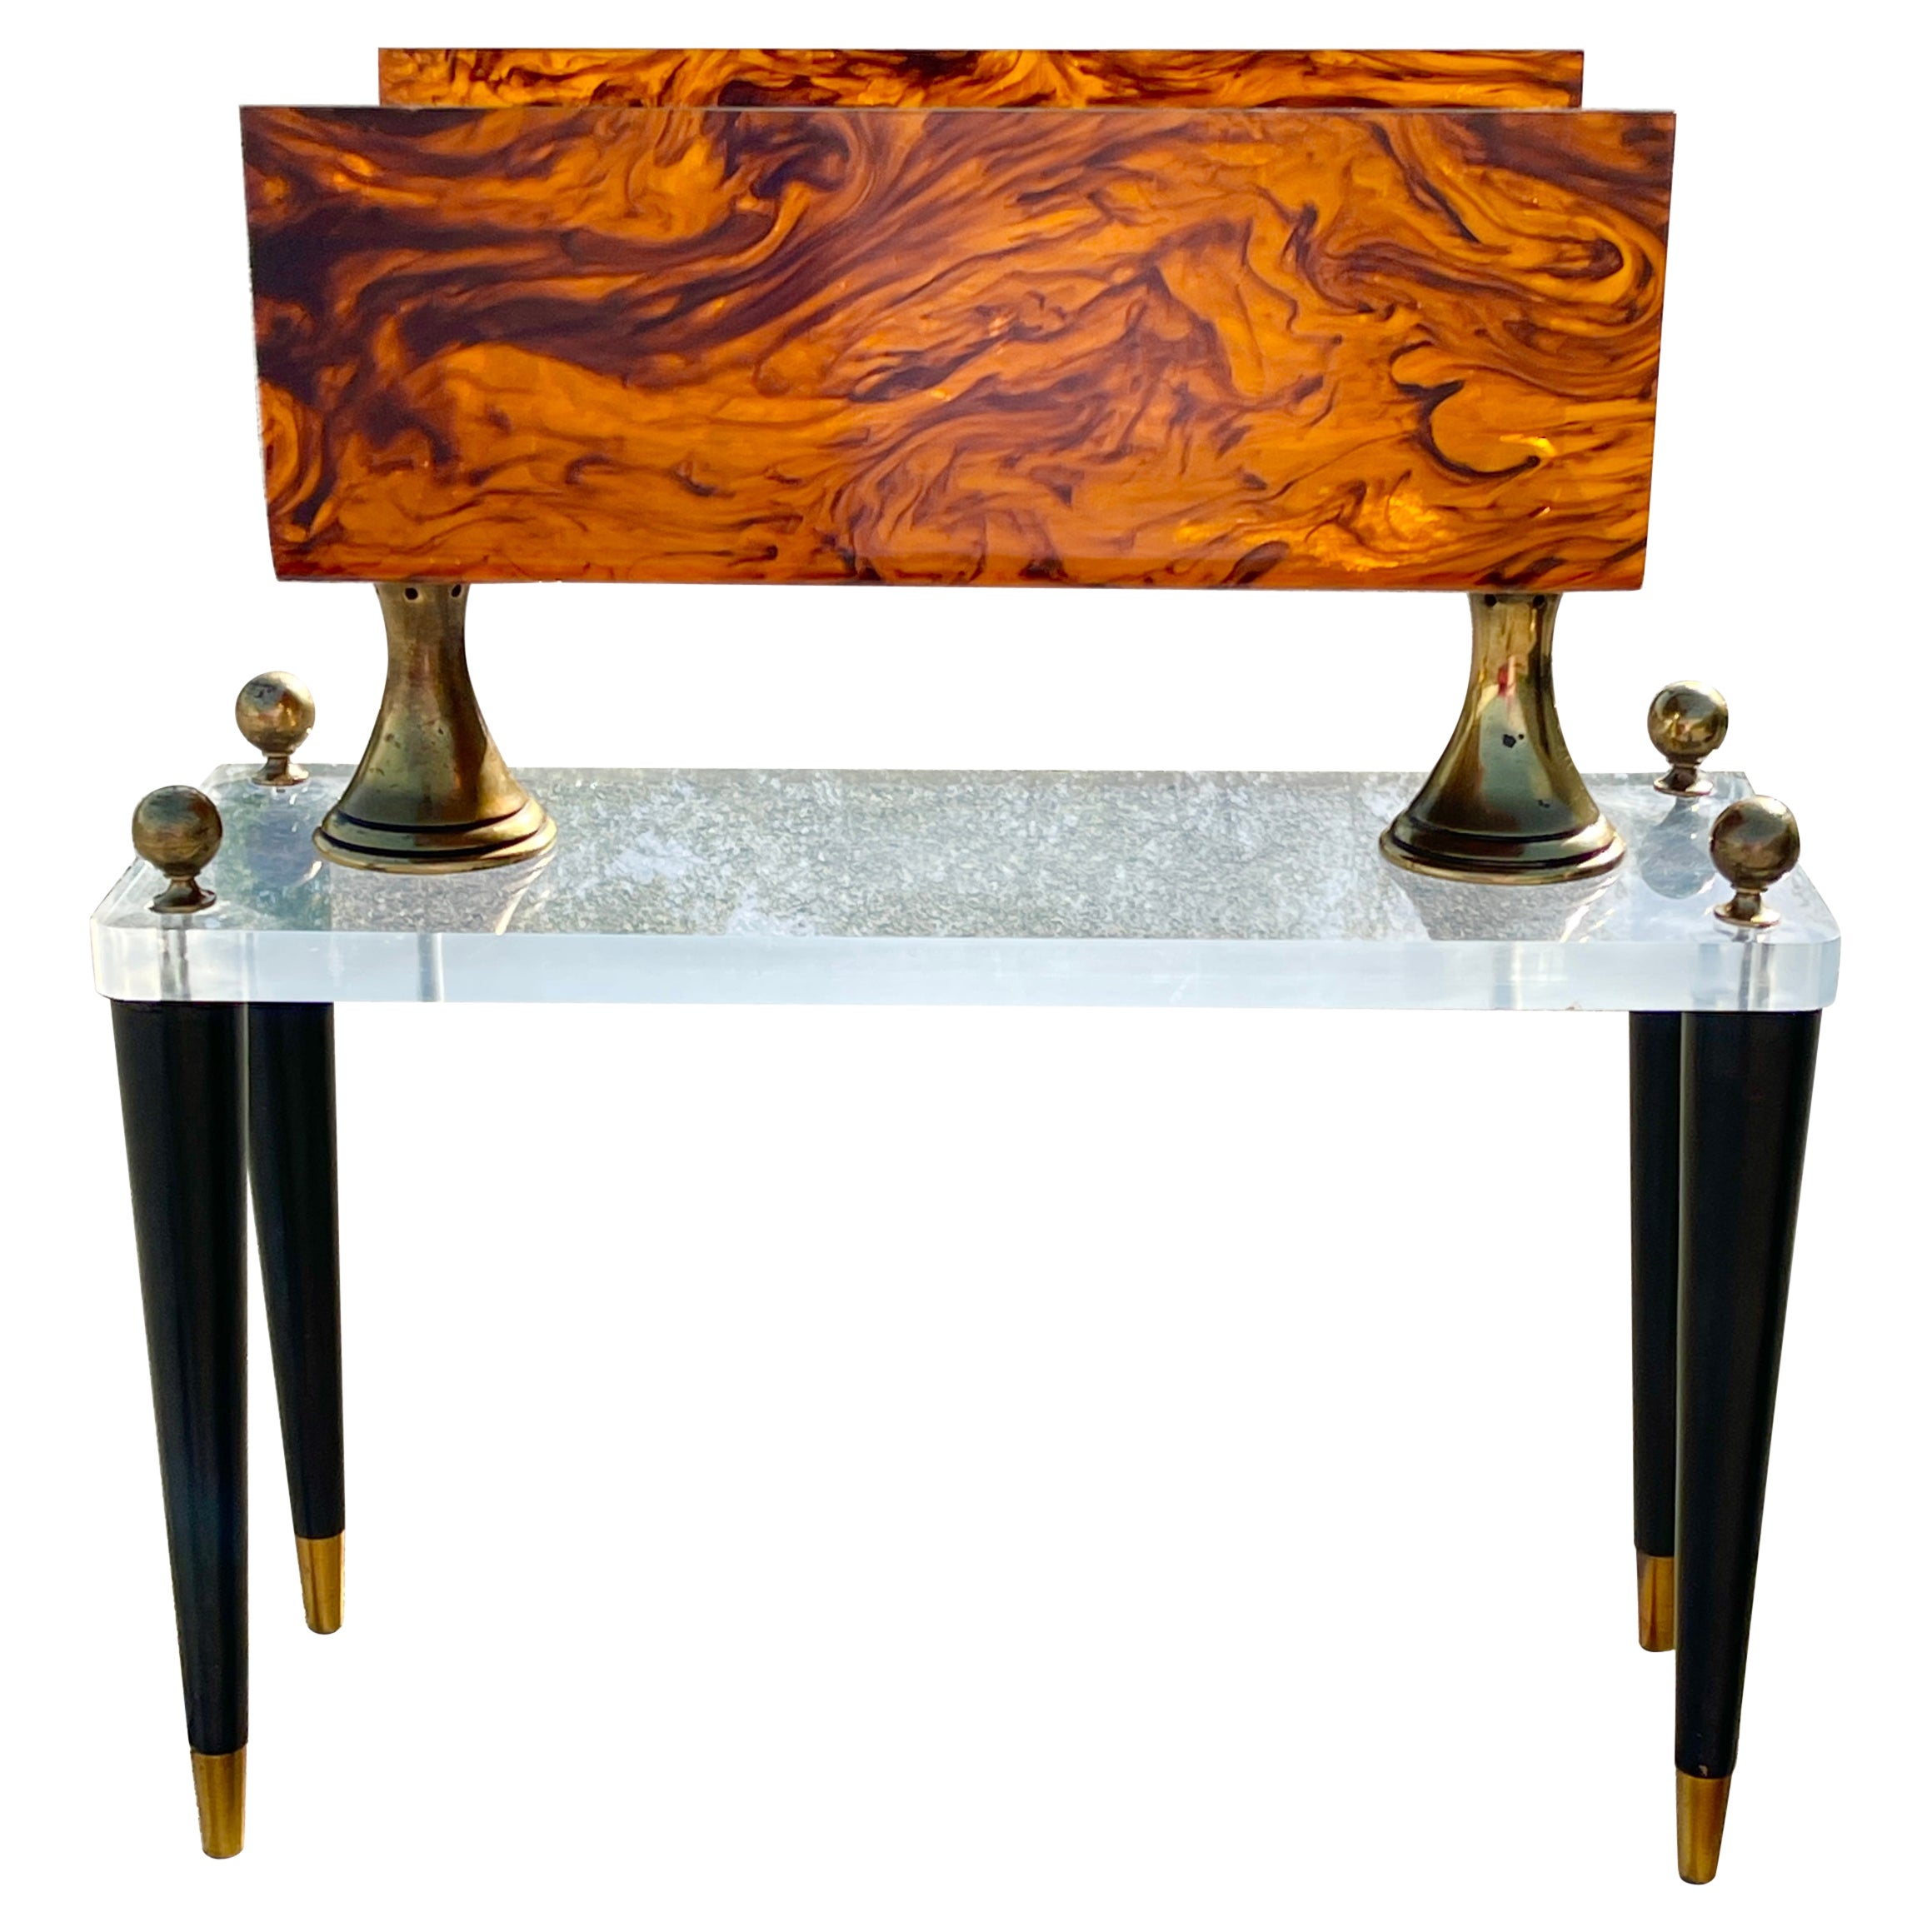 Lucite and Faux Tortoiseshell Magazine Stand